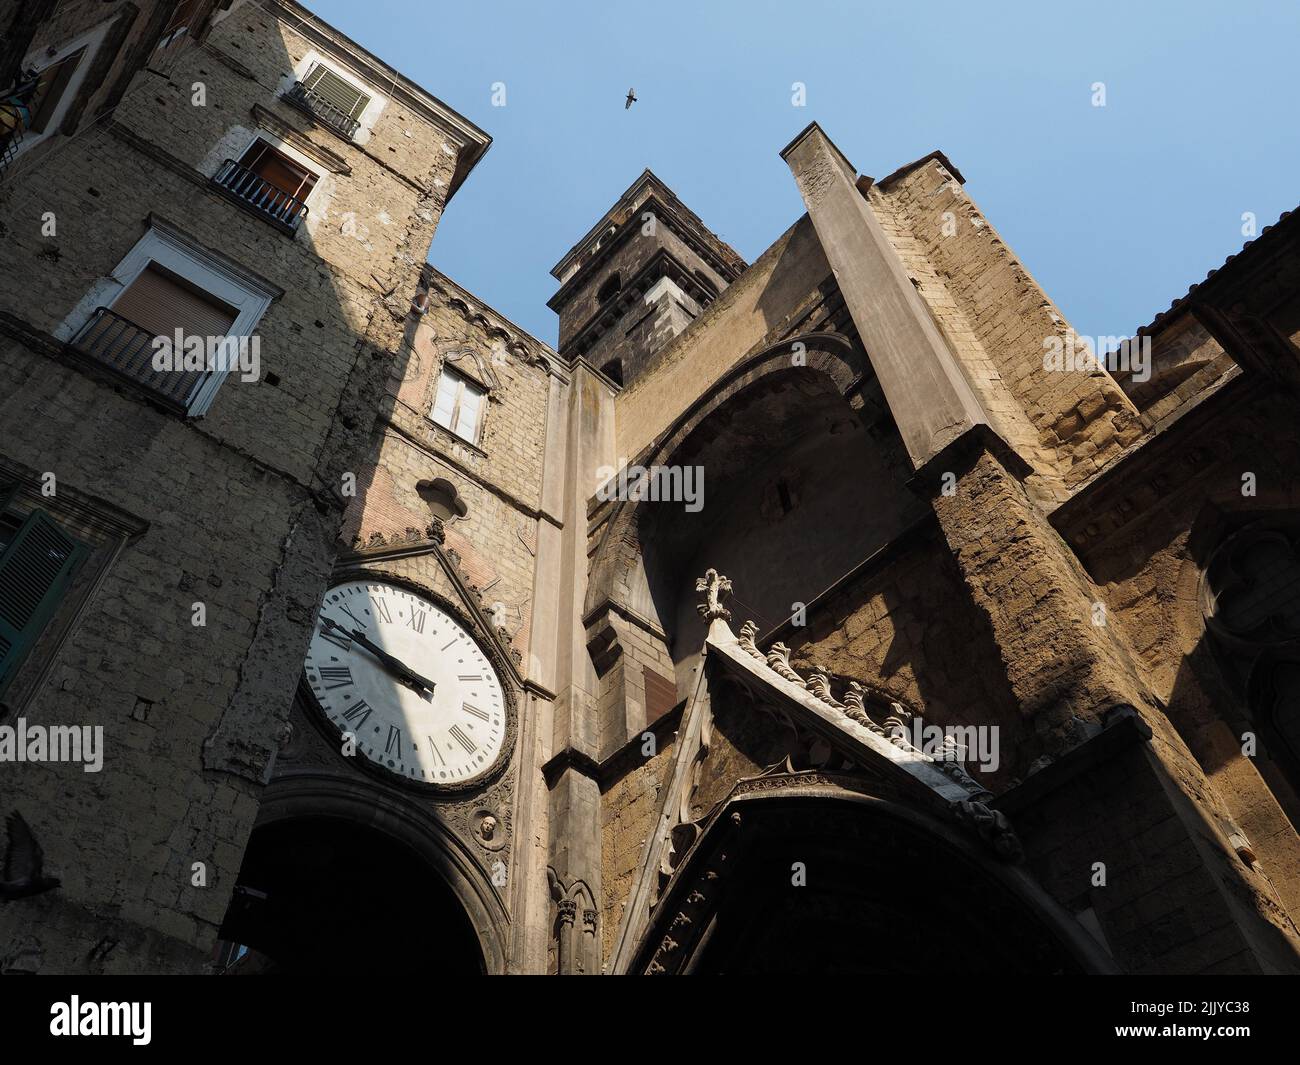 Church in Naples with little tower and clock in a bridge across the street. Napoli, Campania, Italy Stock Photo